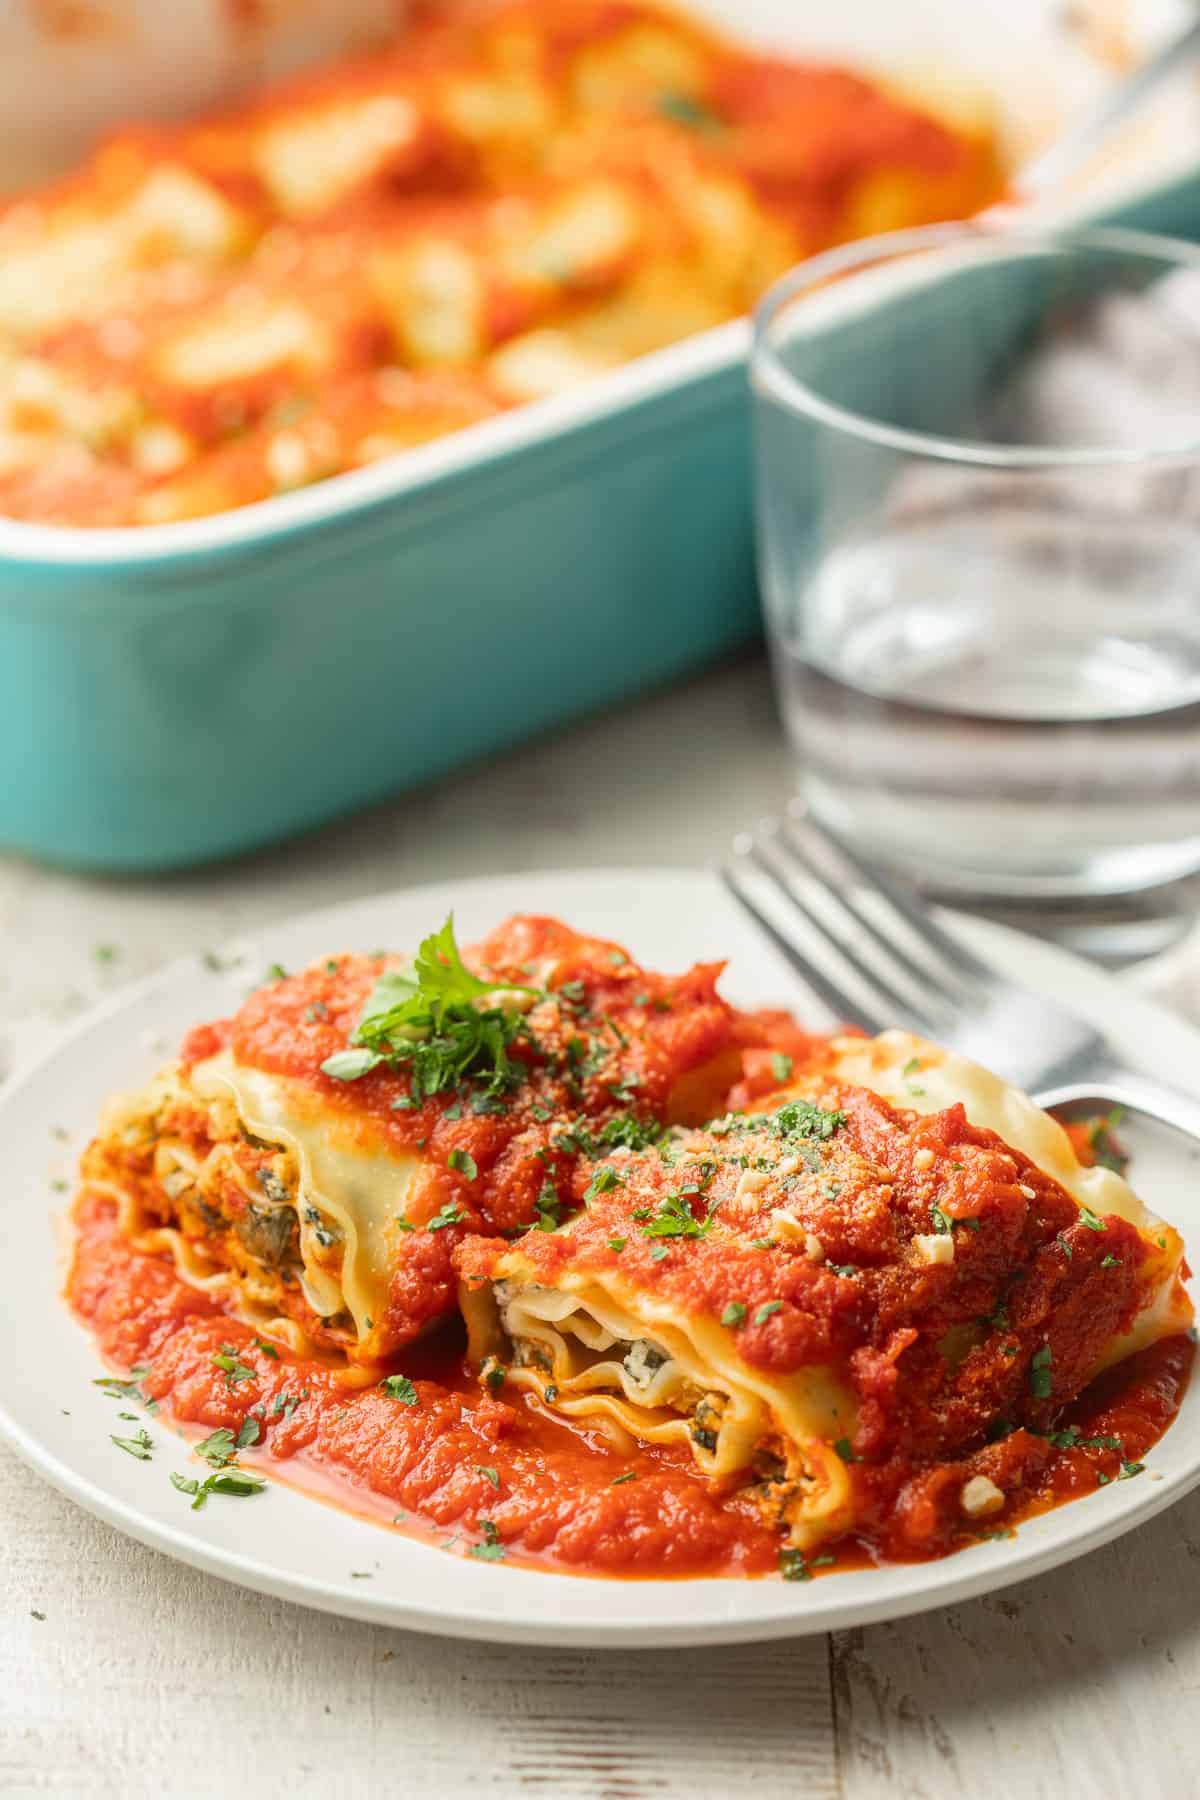 Two Vegan Lasagna Roll-Ups on a place with water glass and baking dish in the background.